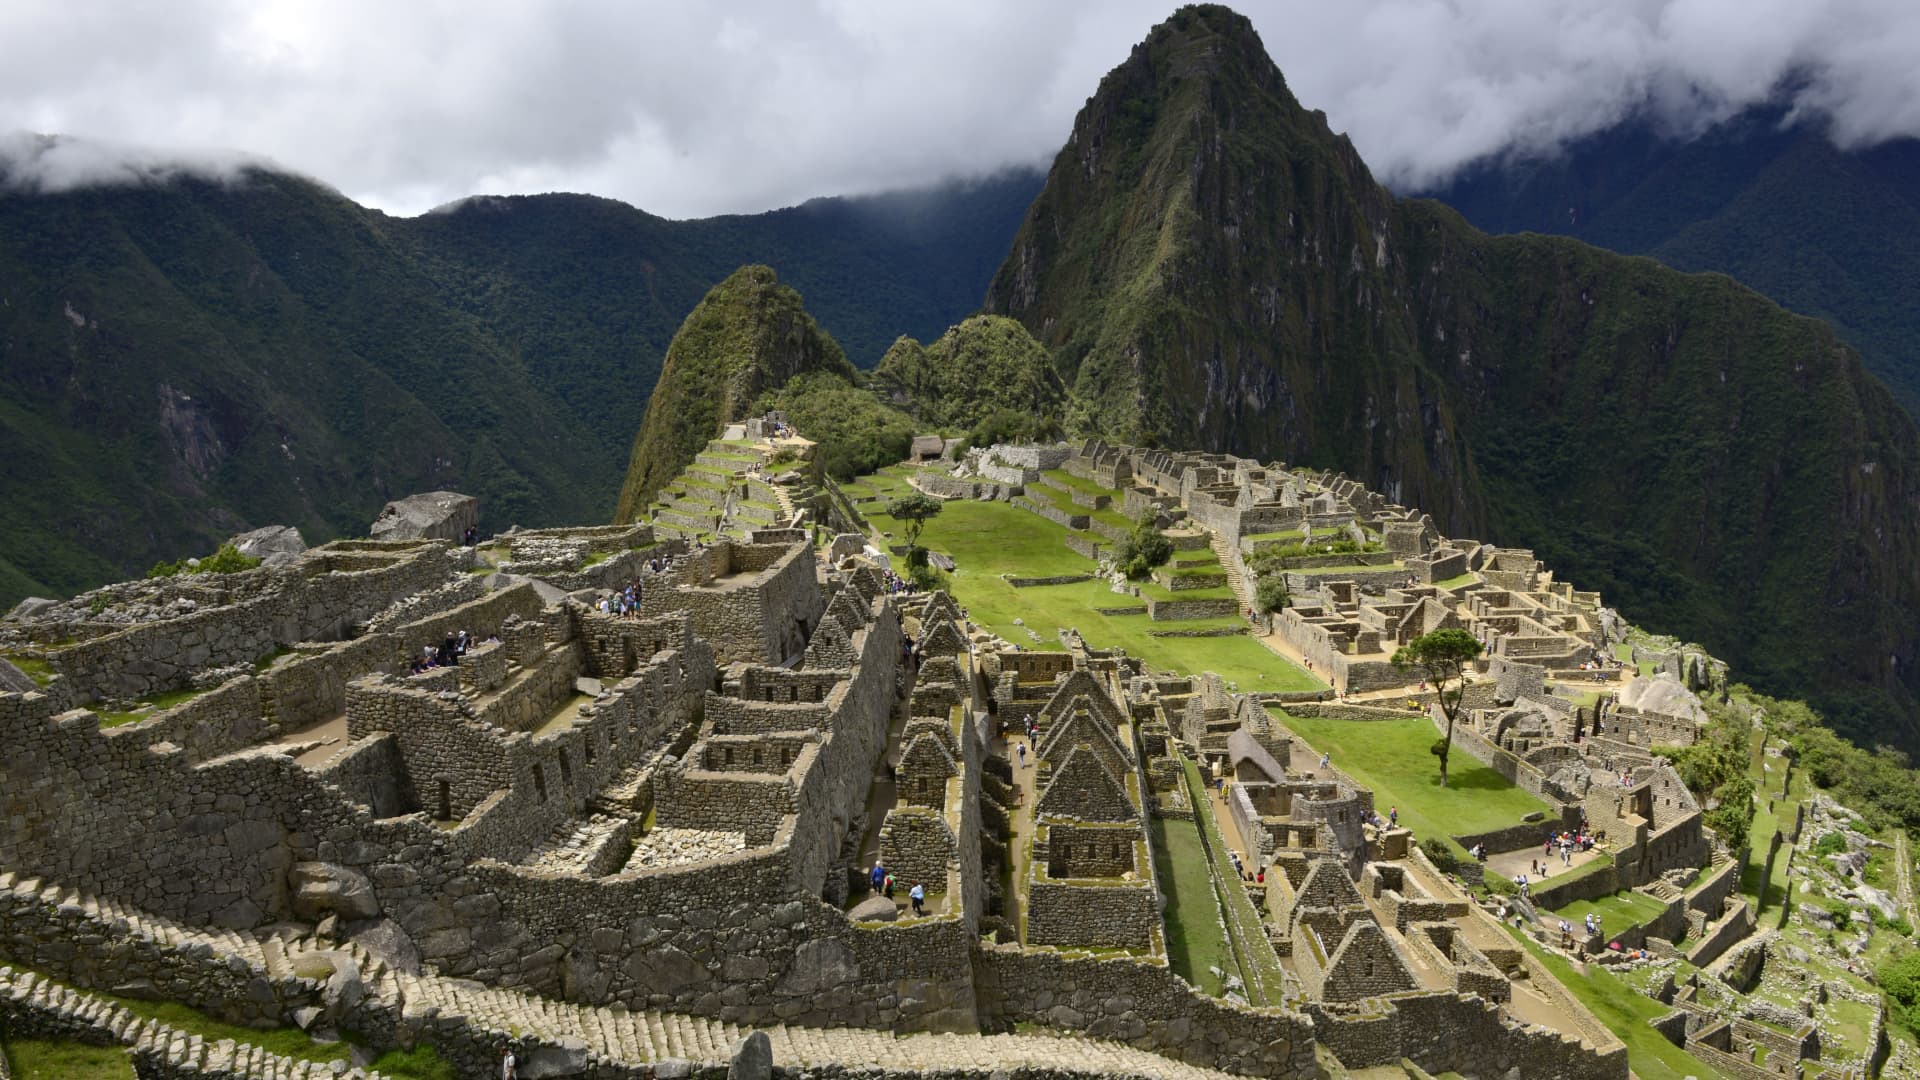 There are four circuits, or routes, at the Citadel, which is the area most often depicted in photos of Machu Picchu.